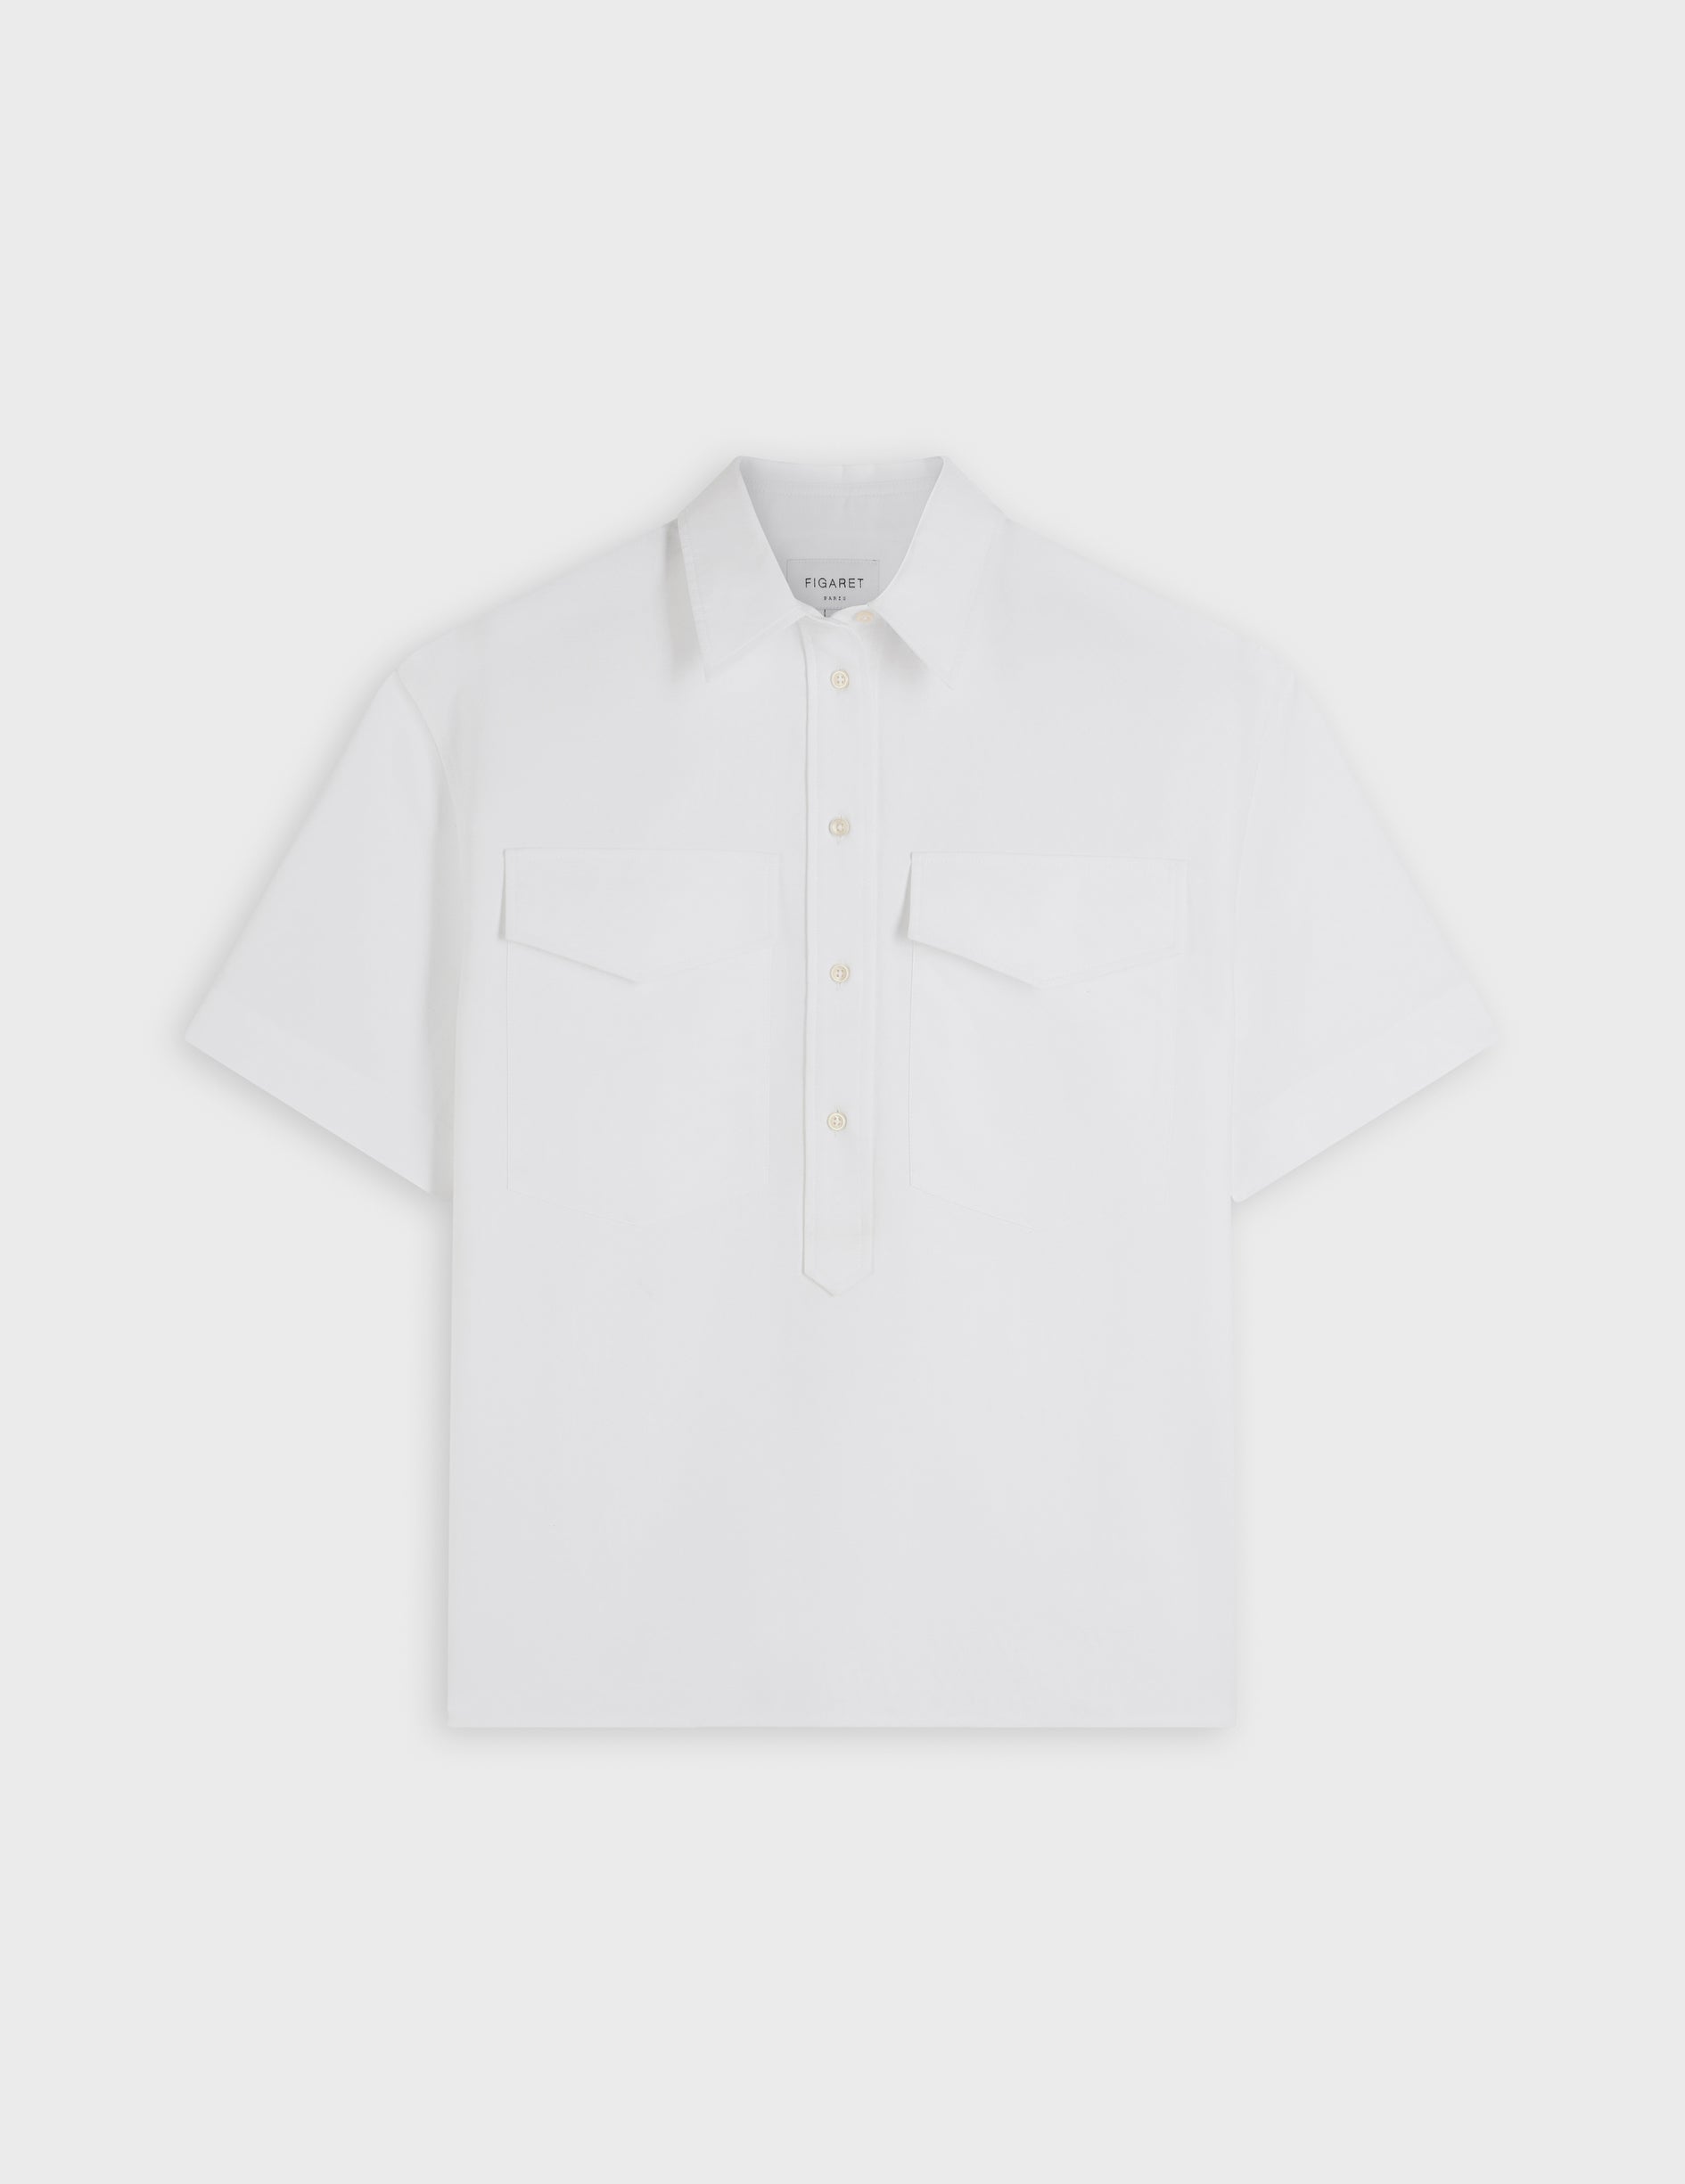 Chemise Hillary manches courtes blanche - Oxford - Col Chemise